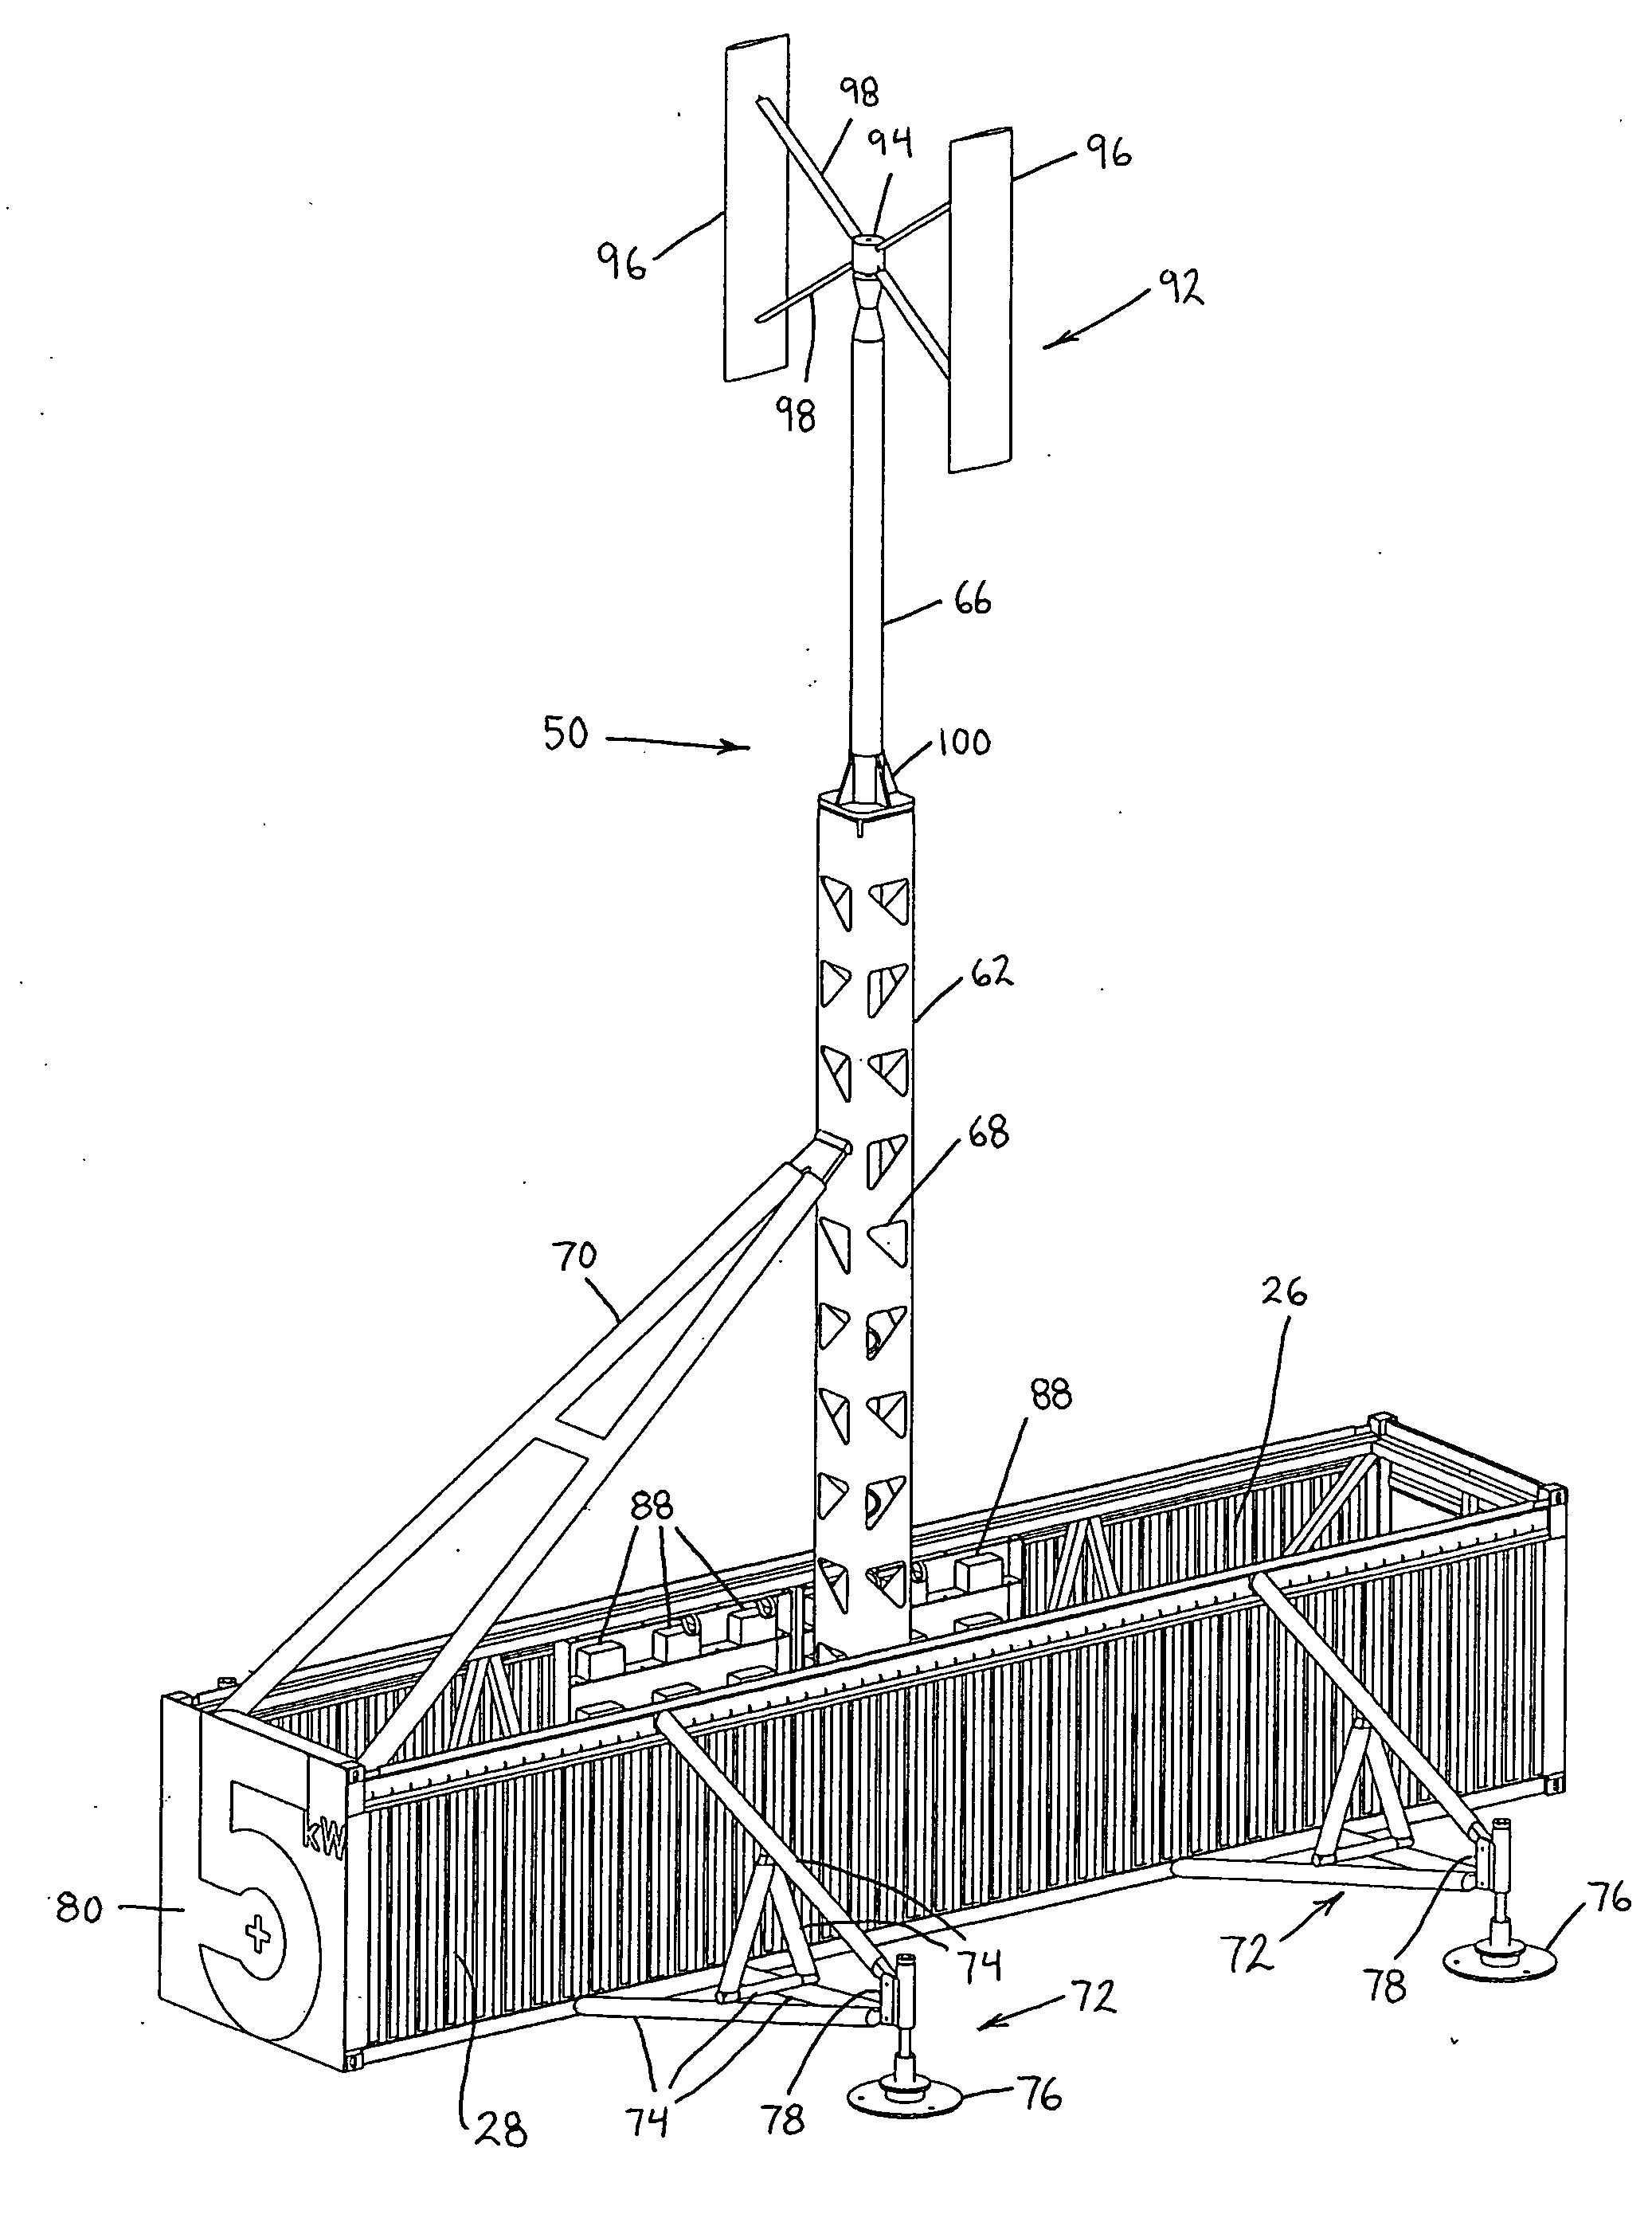 Deployable wind power and battery unit